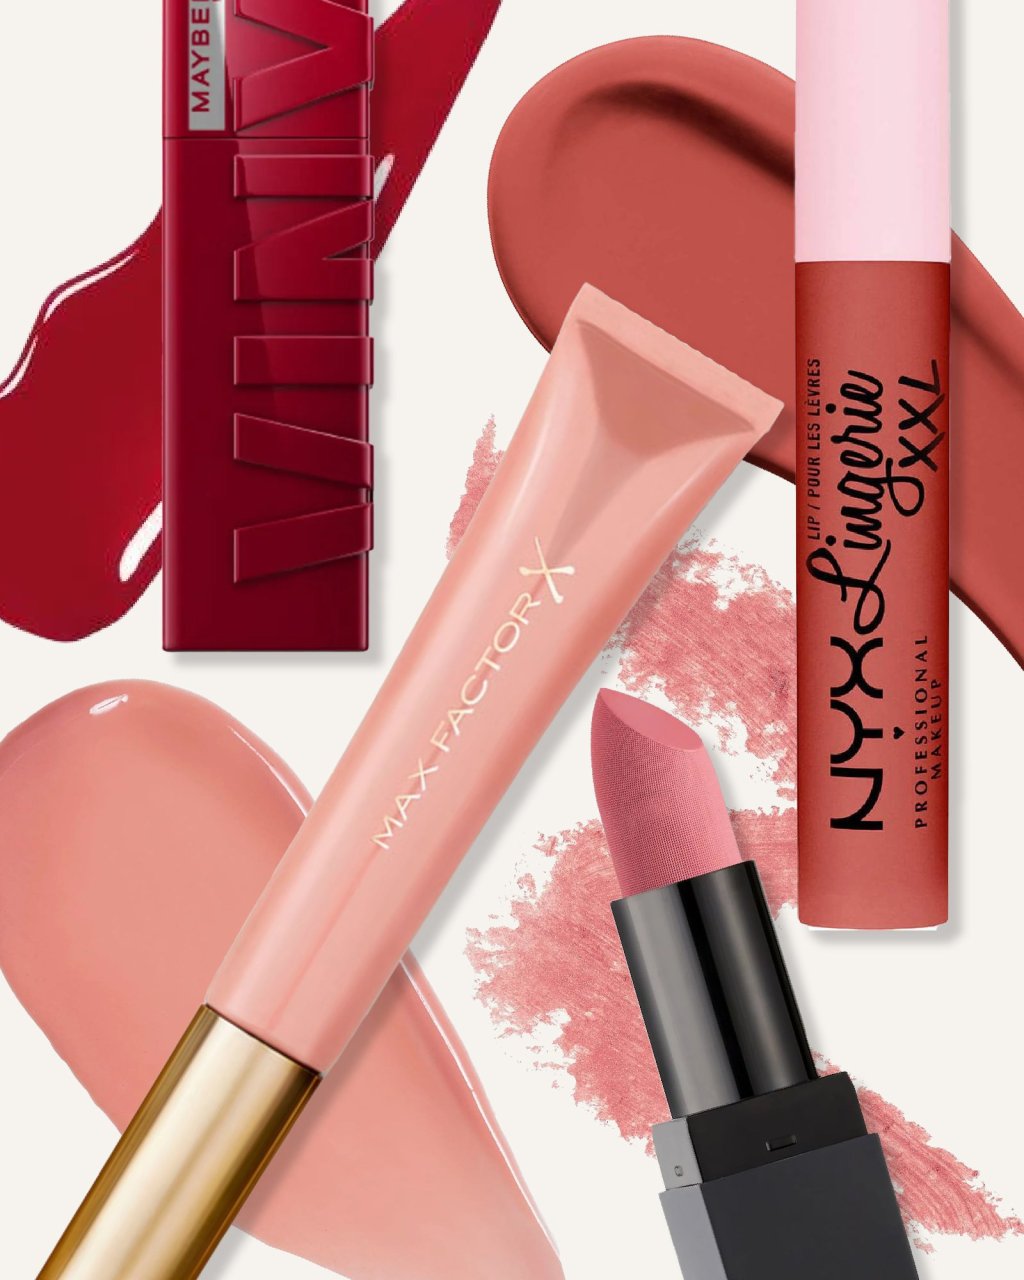 NYX Professional Makeup - Which shades of our new Lip Lingerie XXL